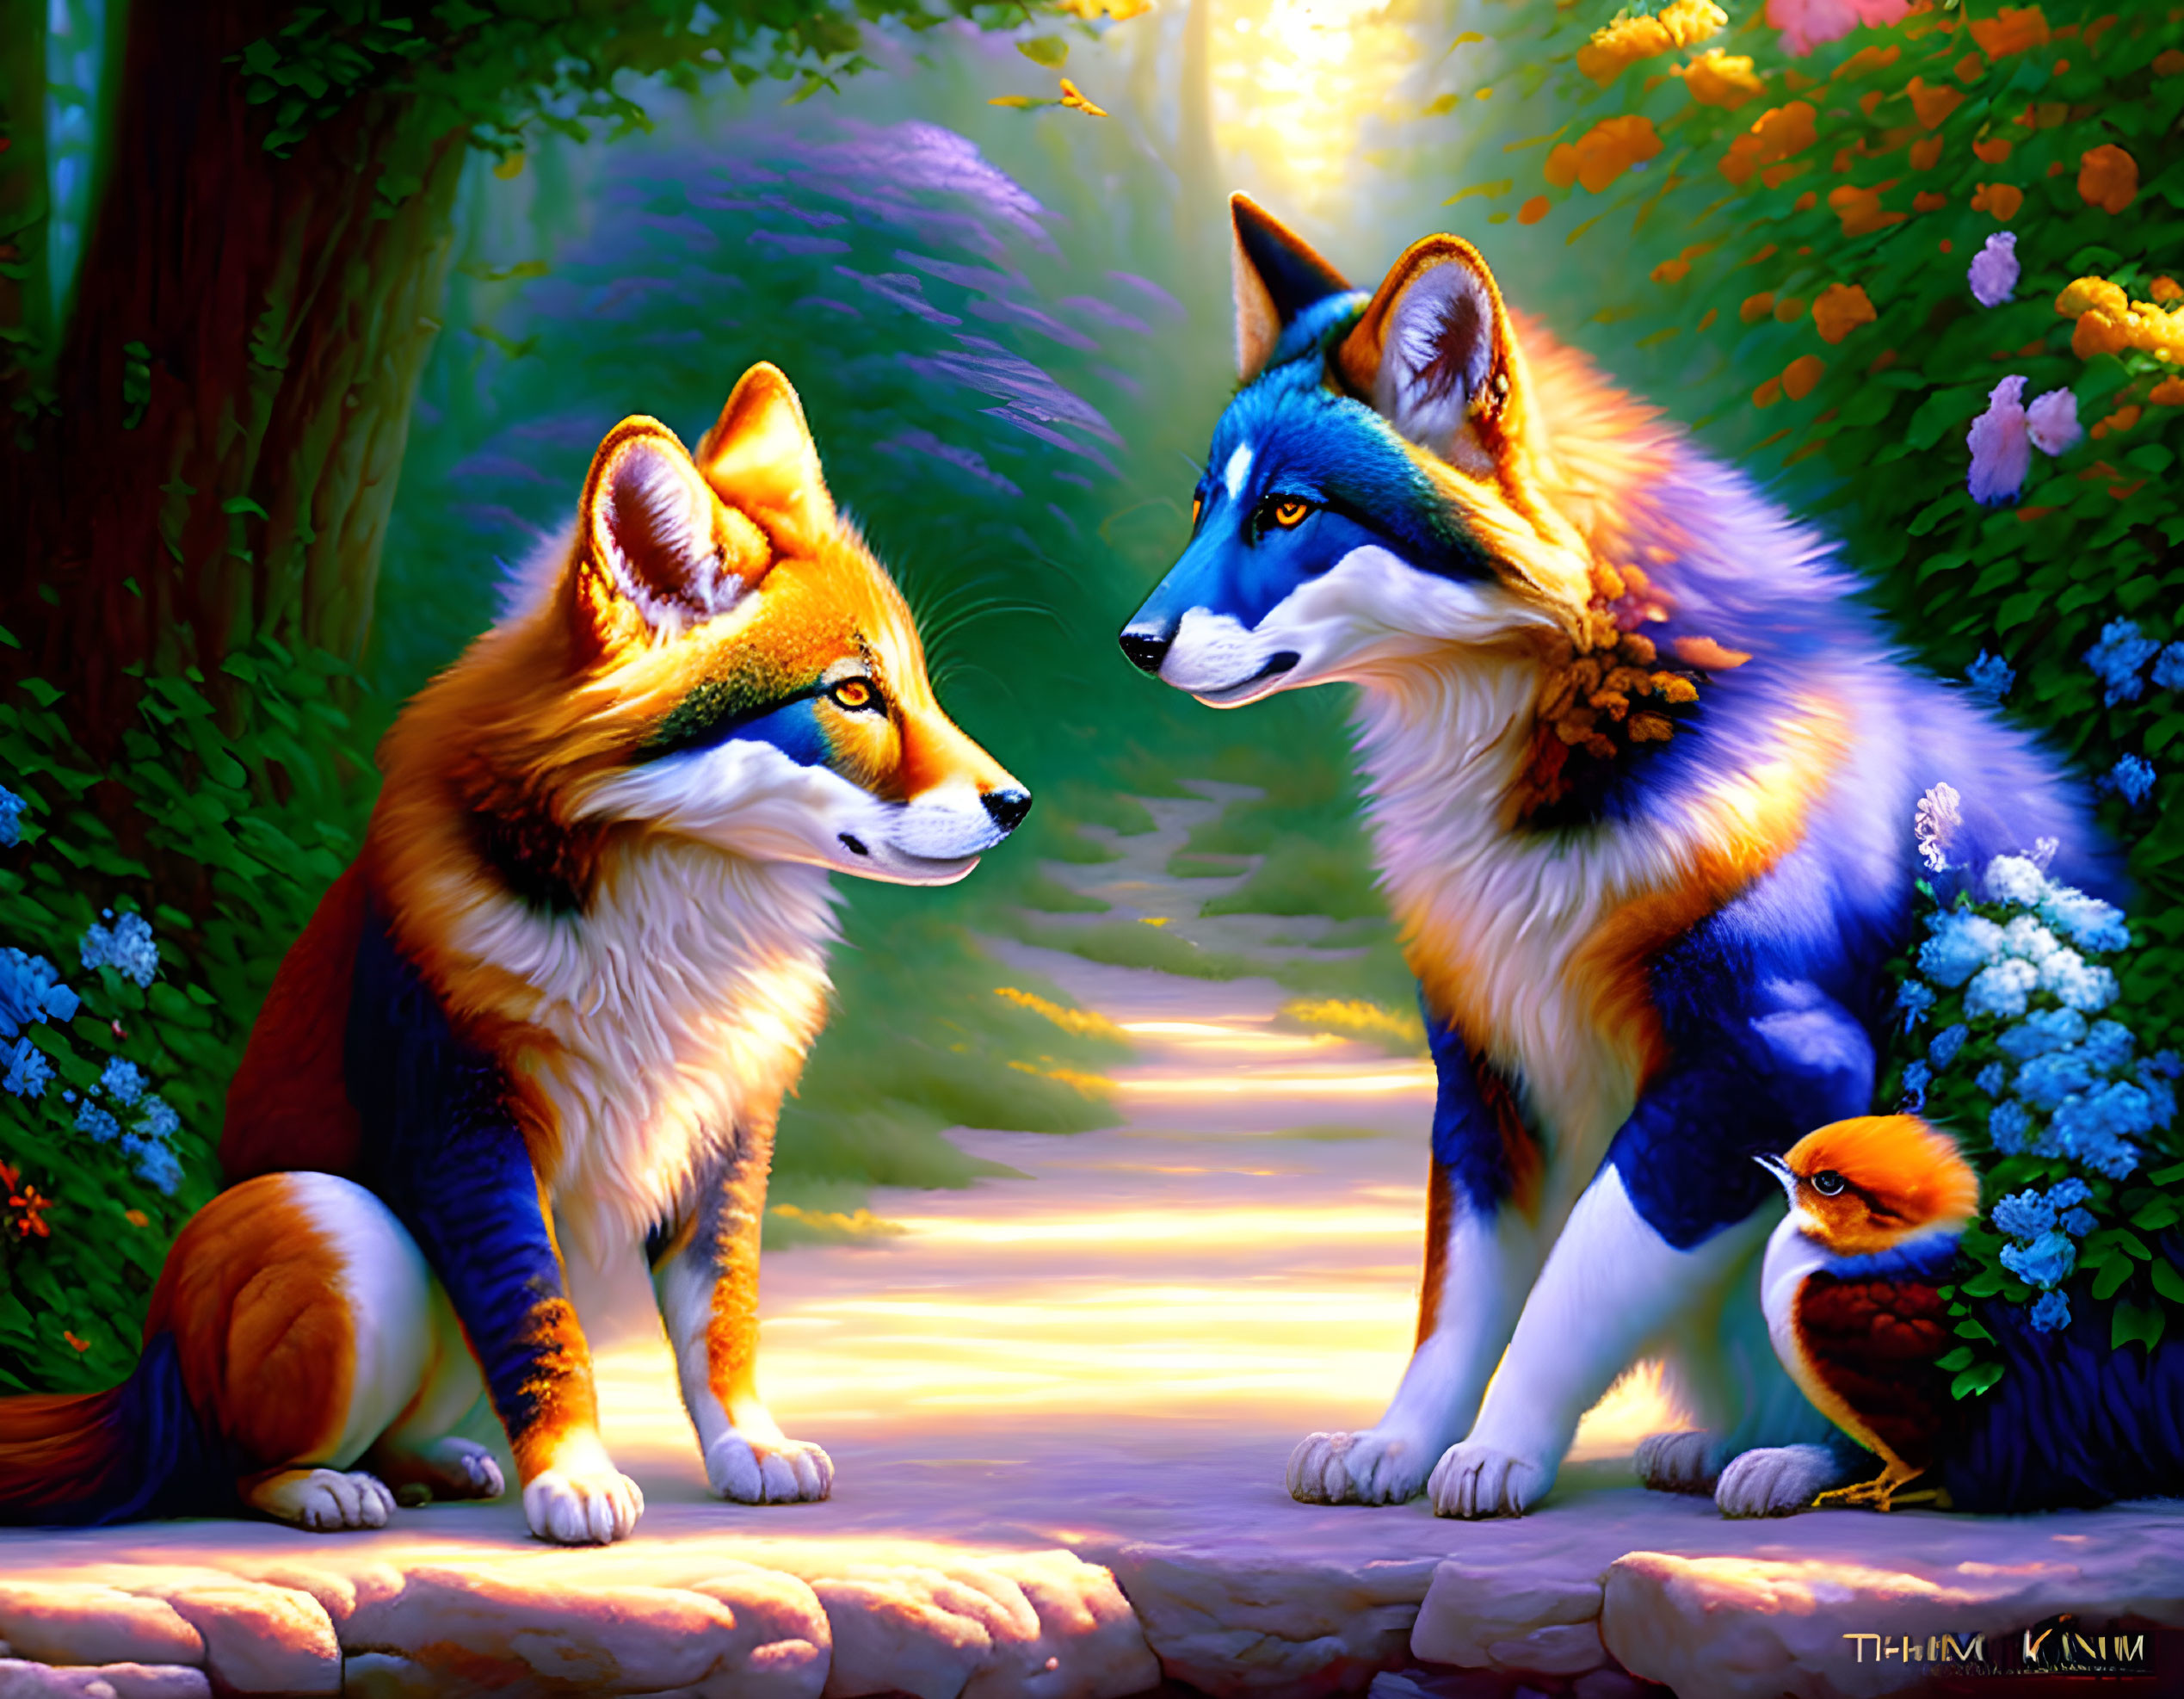 Vibrantly colored anthropomorphic foxes in whimsical forest scene